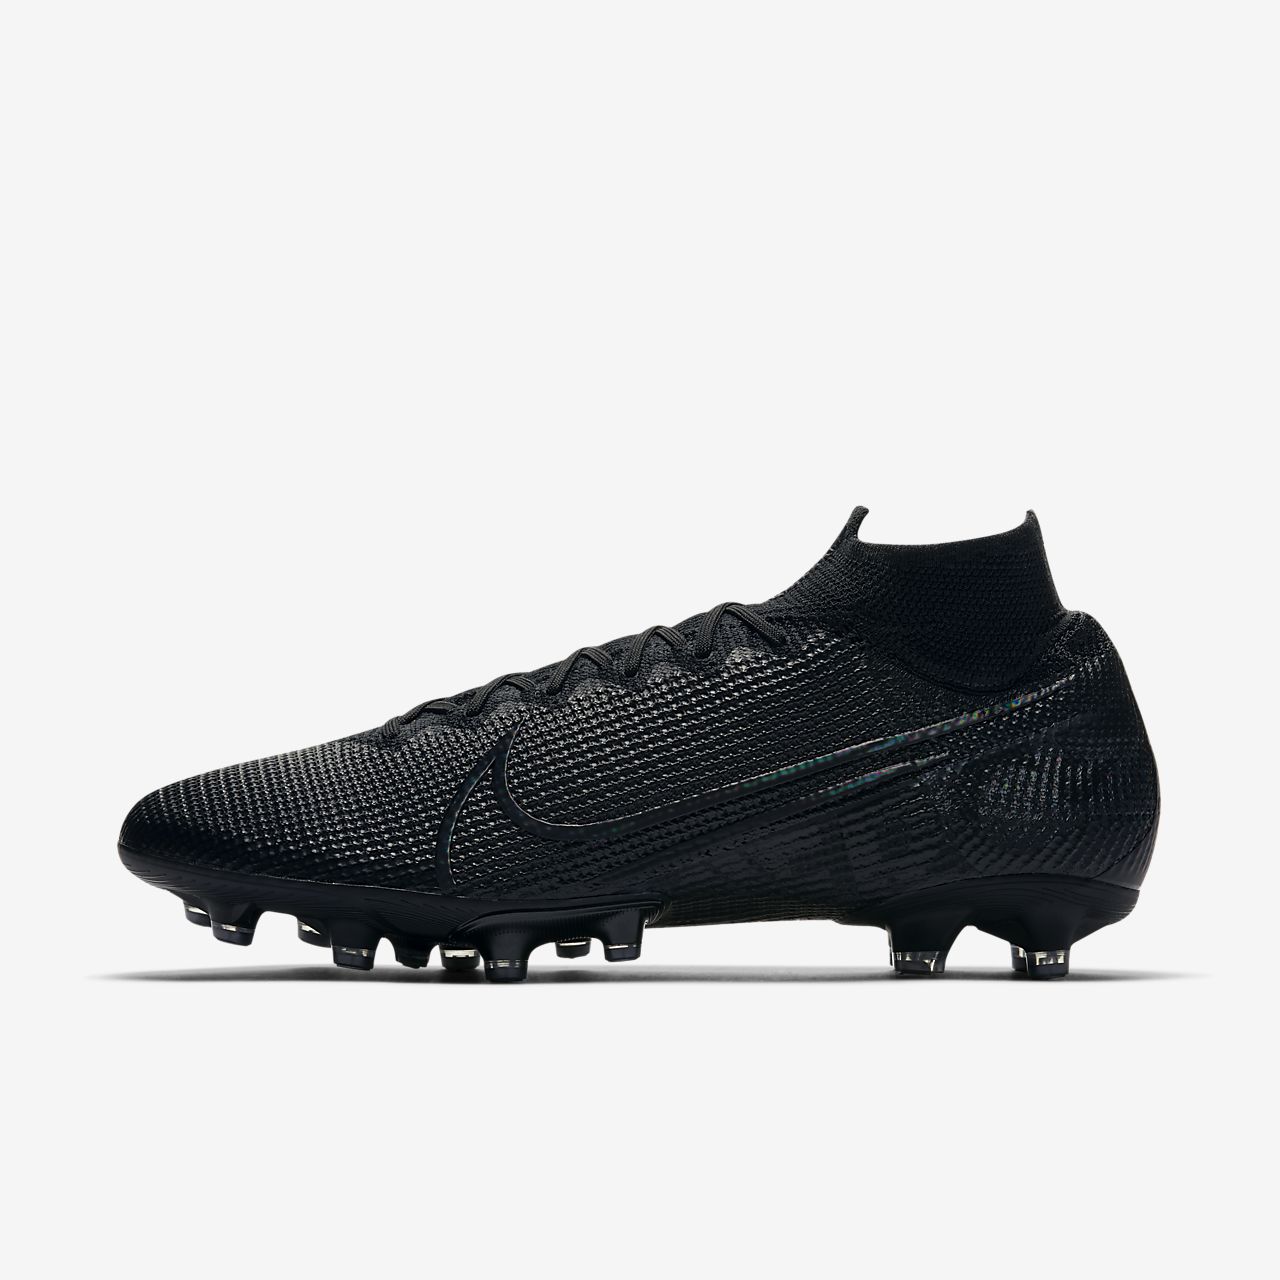 Nike Hypervenom Football Boots Free Delivery Available